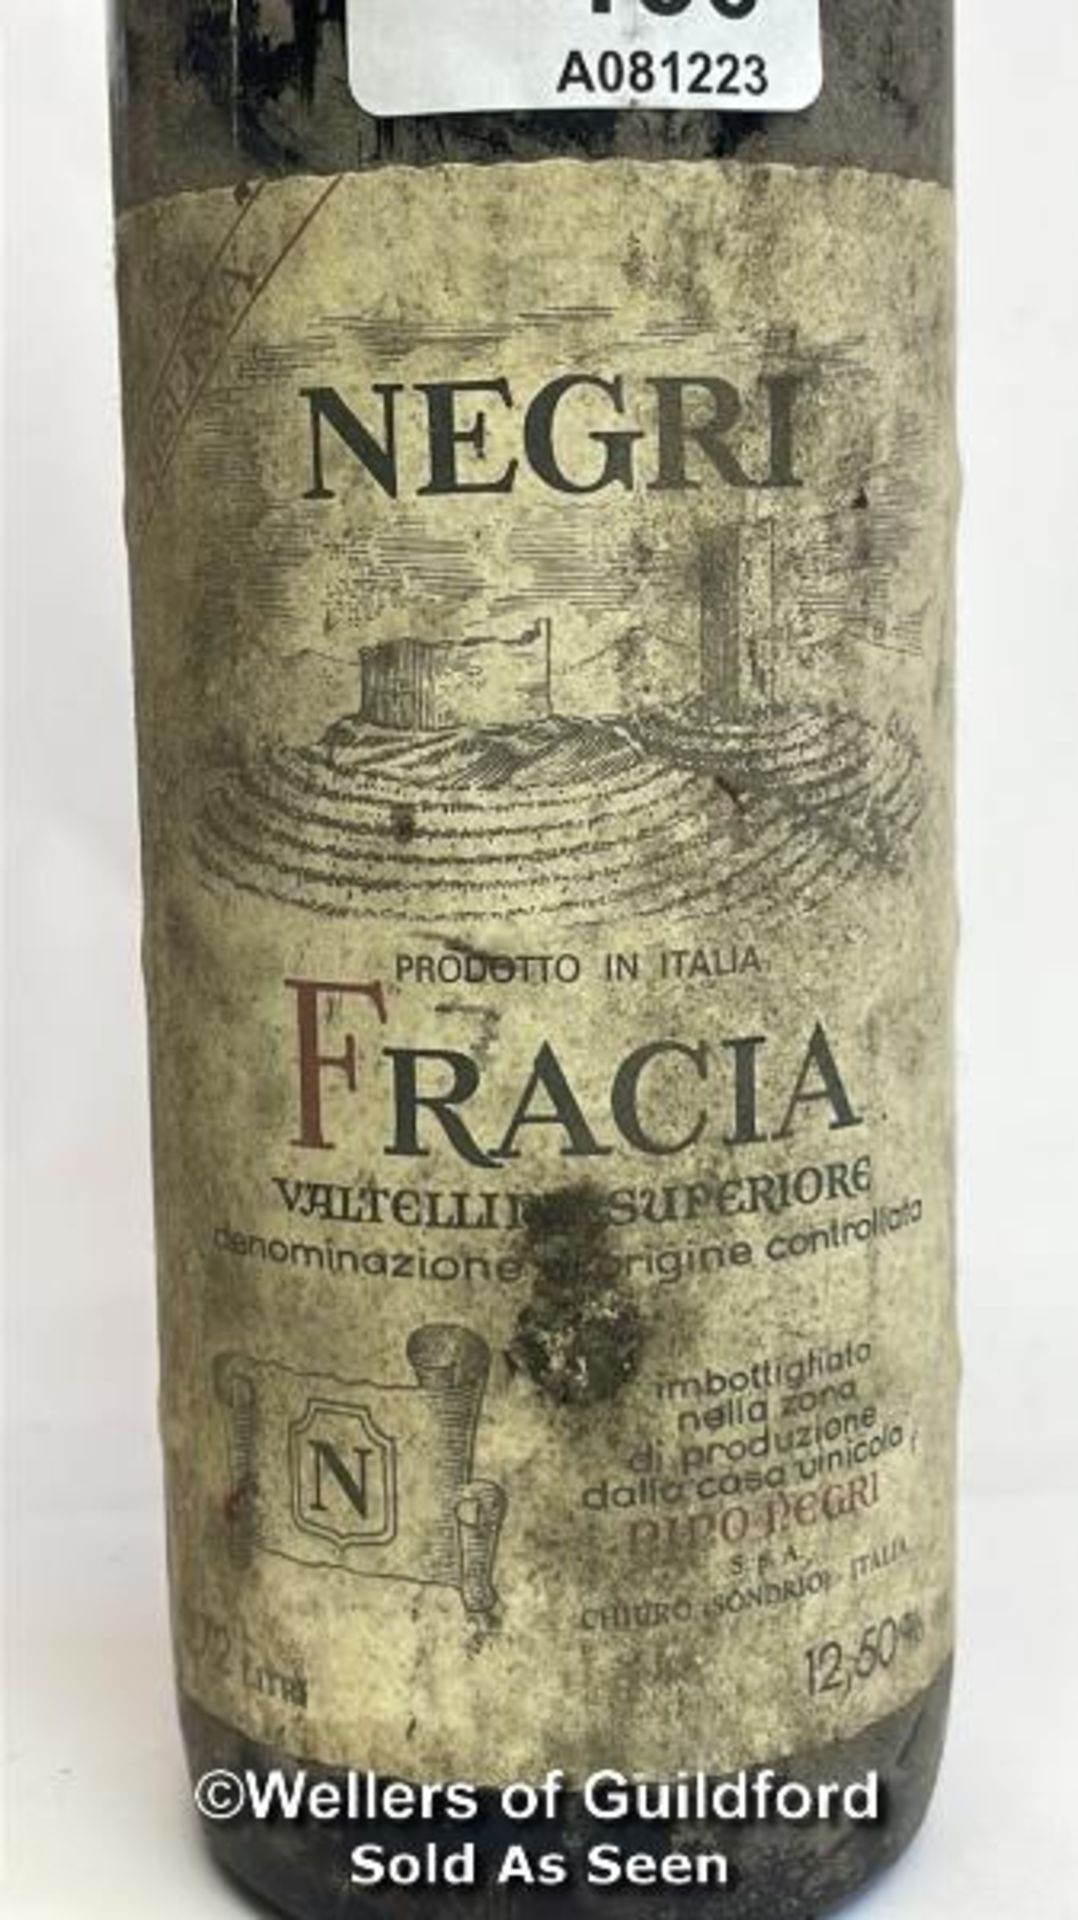 1971 Negri Fracia, 72cl, 12.5% vol / Please see images for fill level and general condition. - Image 2 of 7